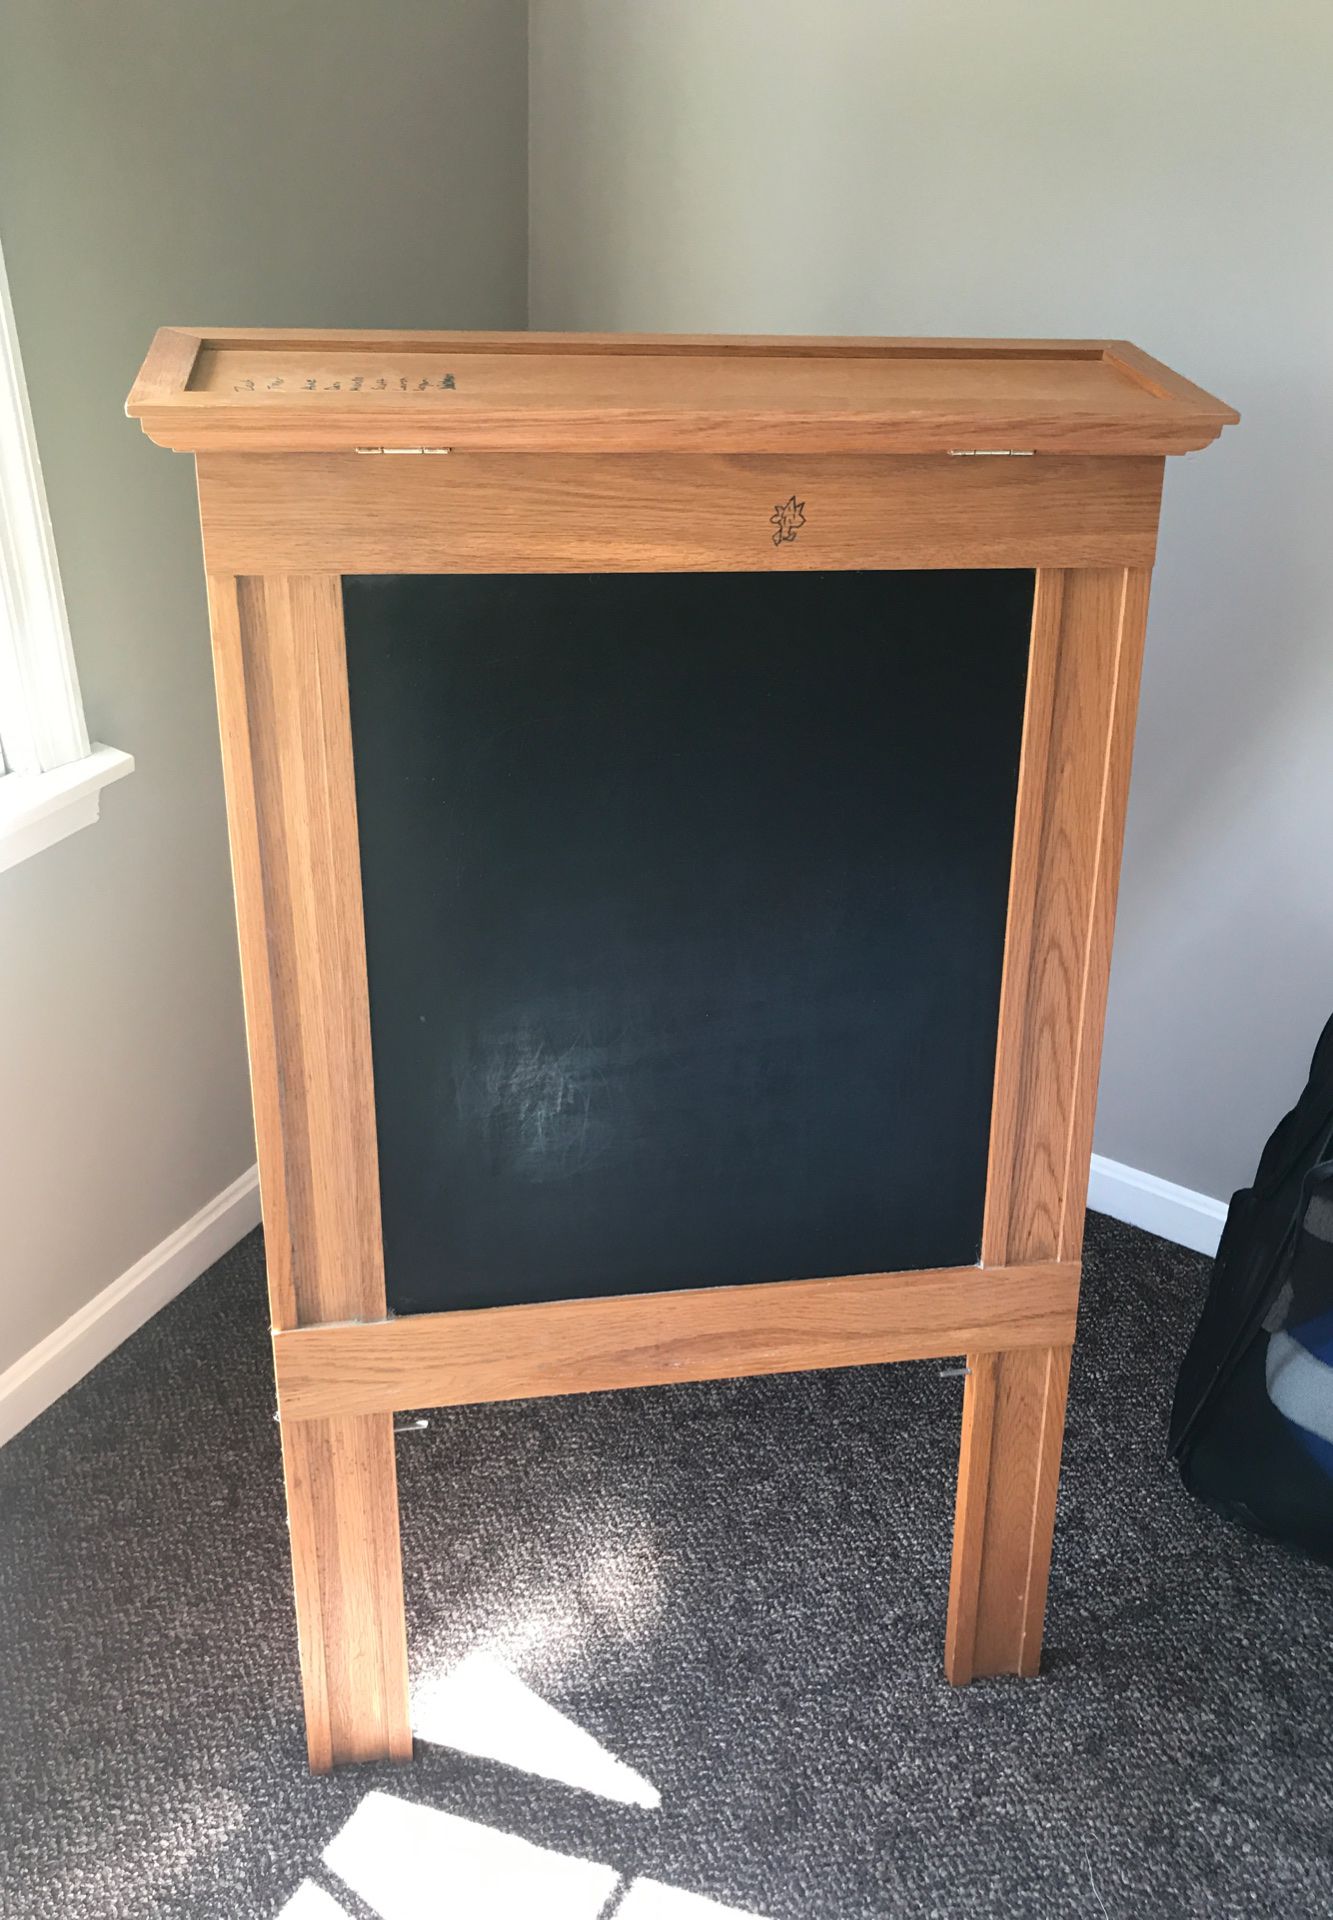 Chalk board or side /dry eraser the other. Store markers in top lid